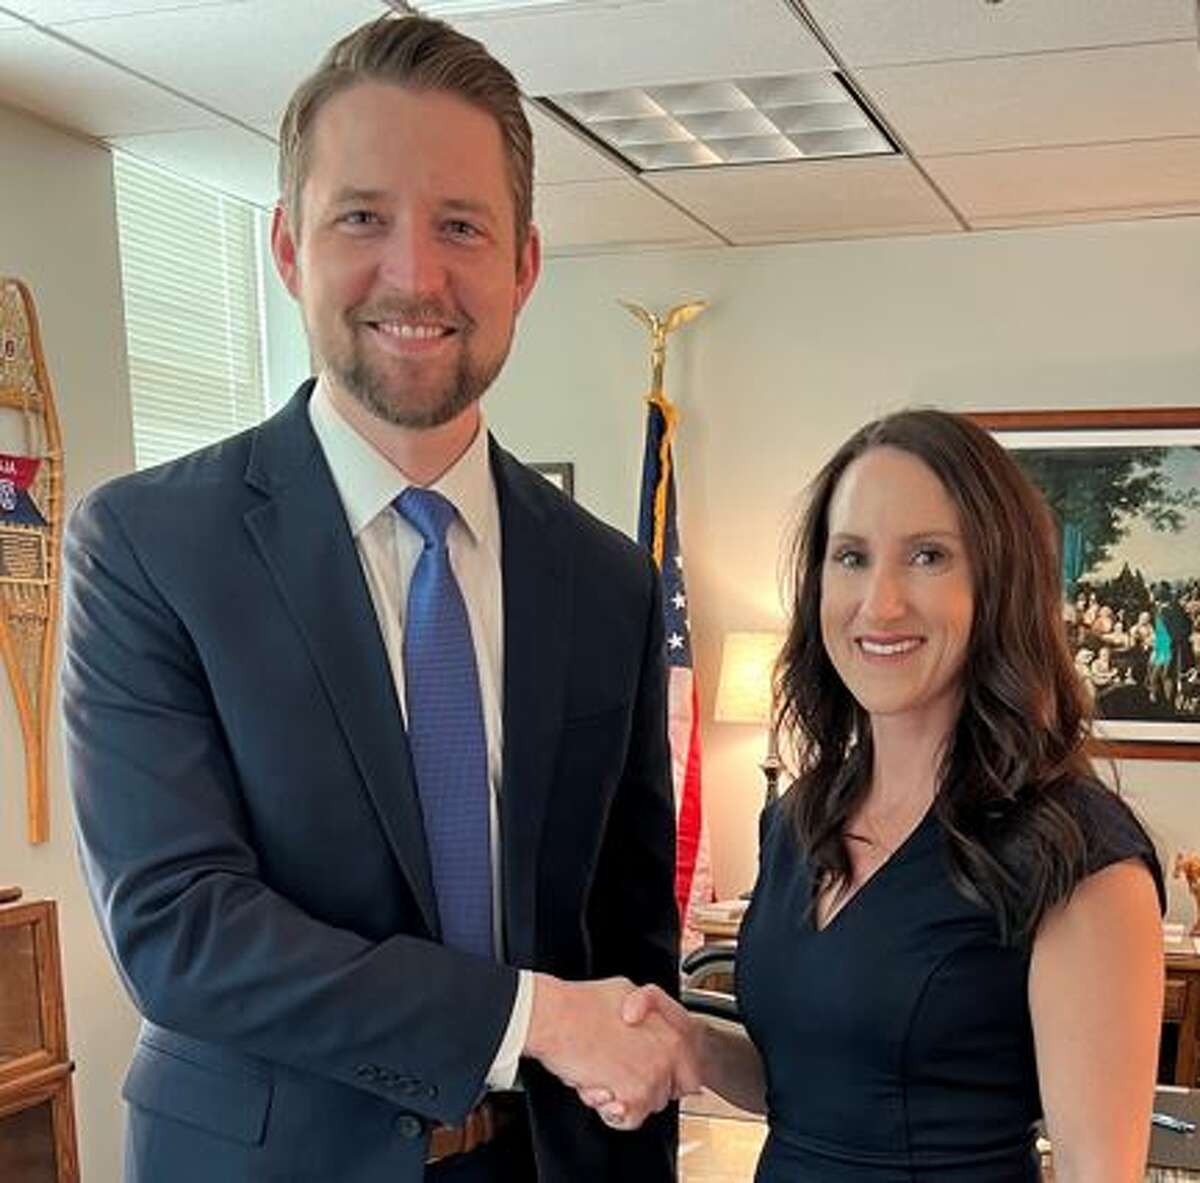 Madison County State's Attorney Tom Haine has announced that Emily Johnson Nielsen has joined the office as its Civil Division Chief.